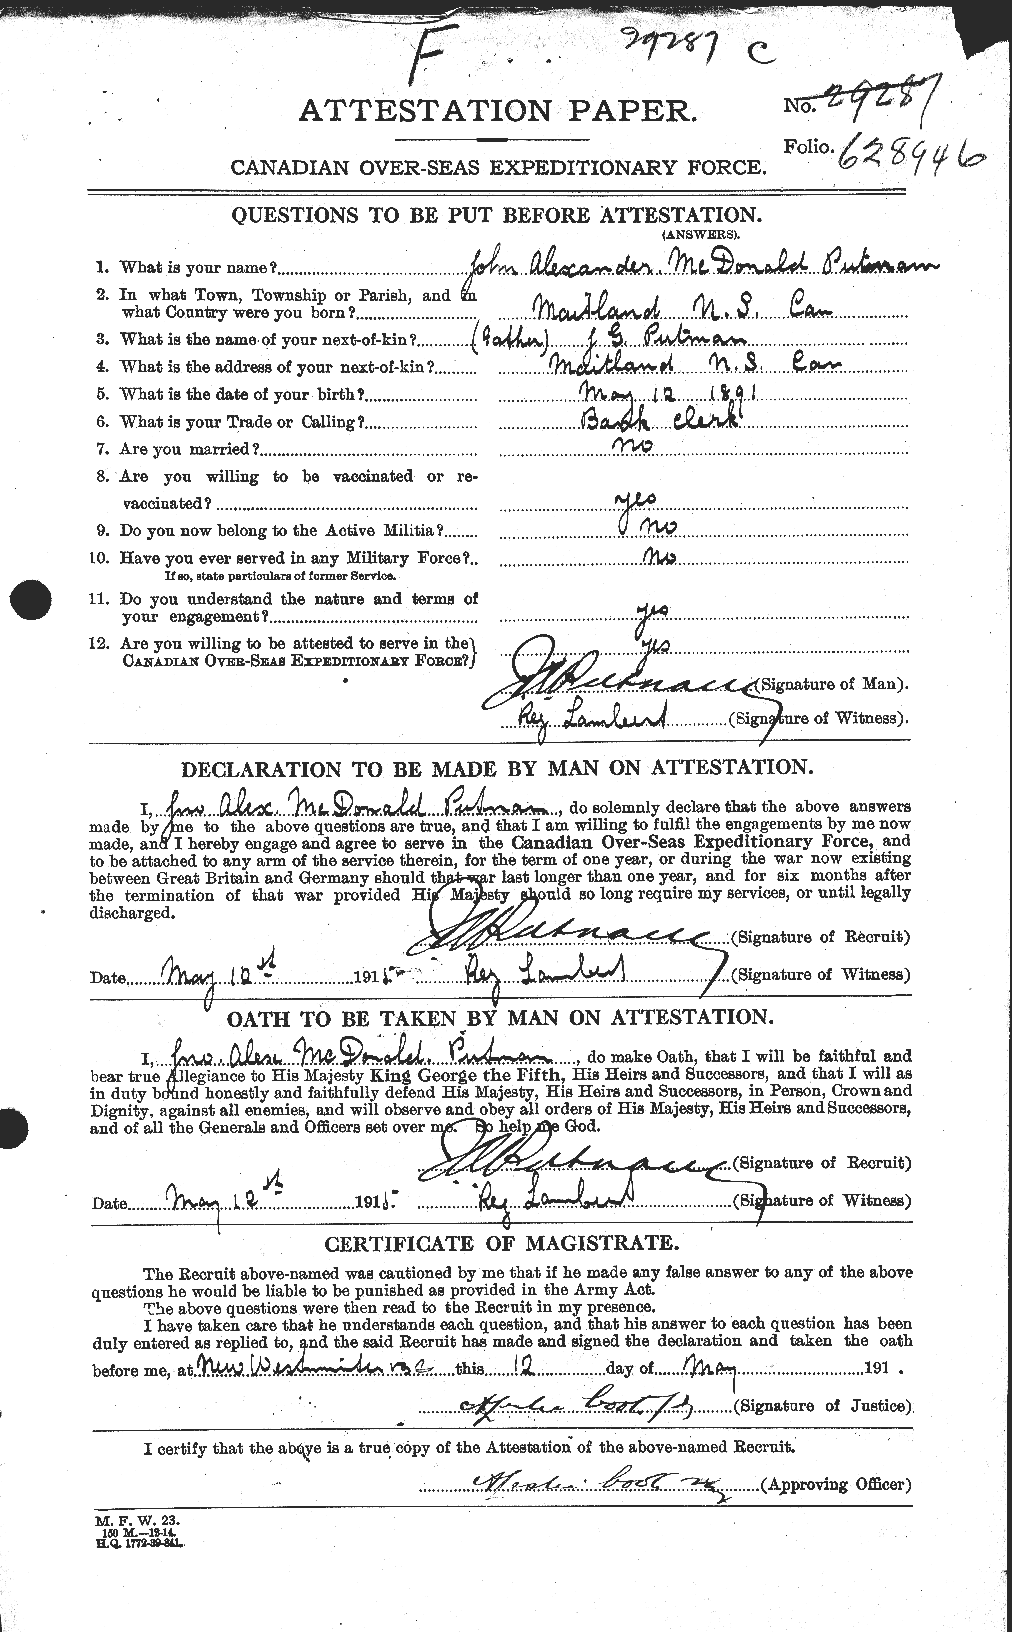 Personnel Records of the First World War - CEF 591730a